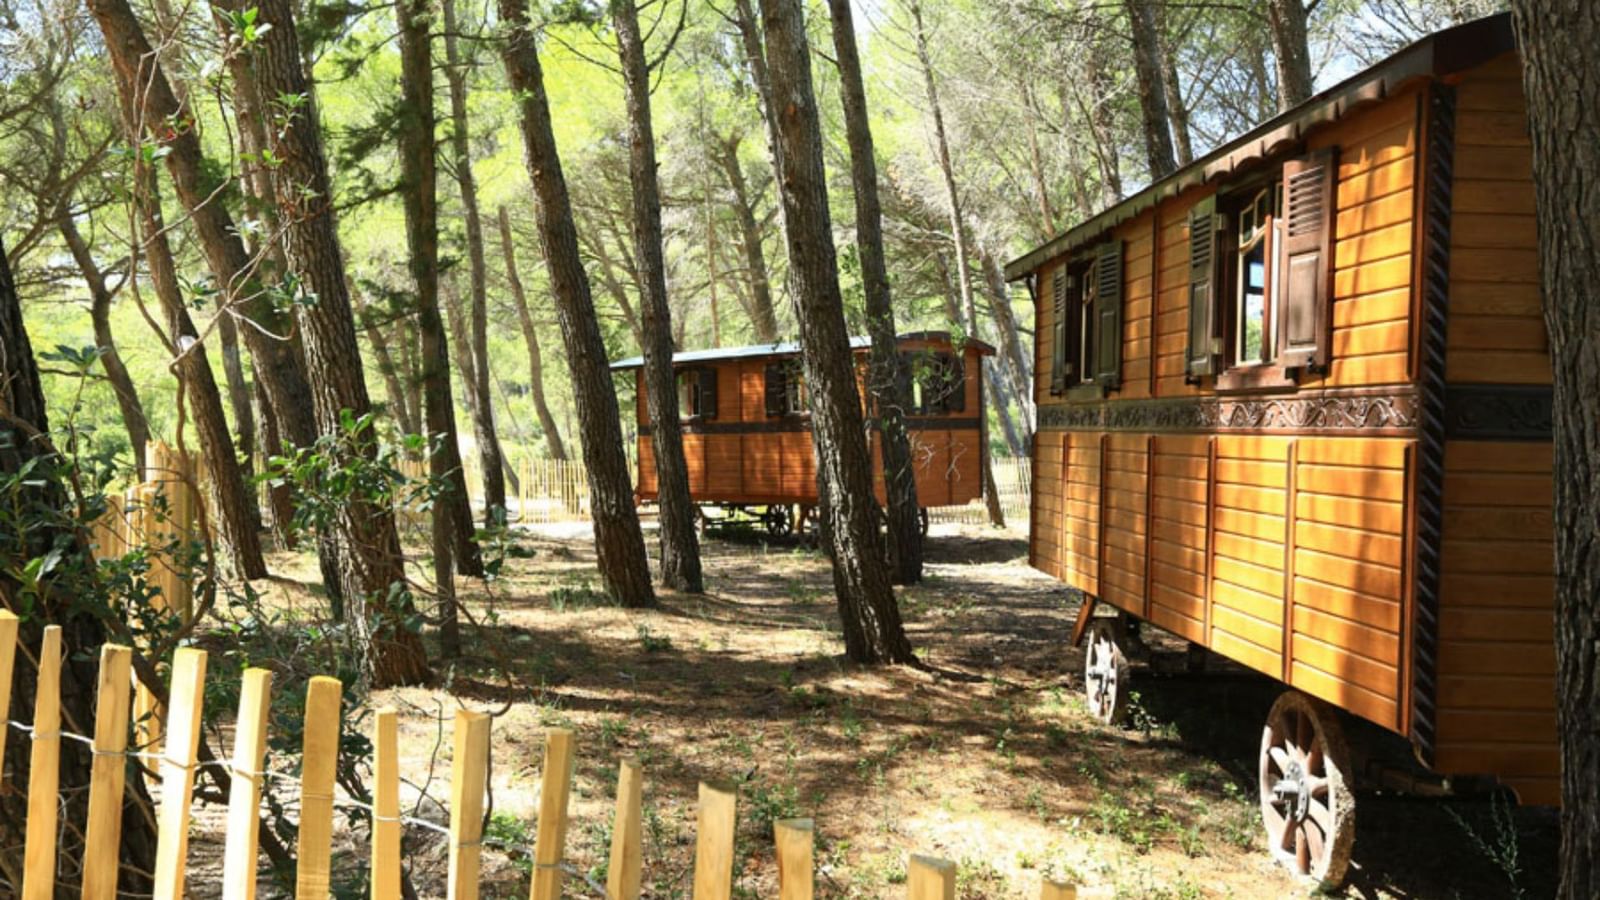 Trailer Cabins in a Forest by a fence at Domaine De Manville